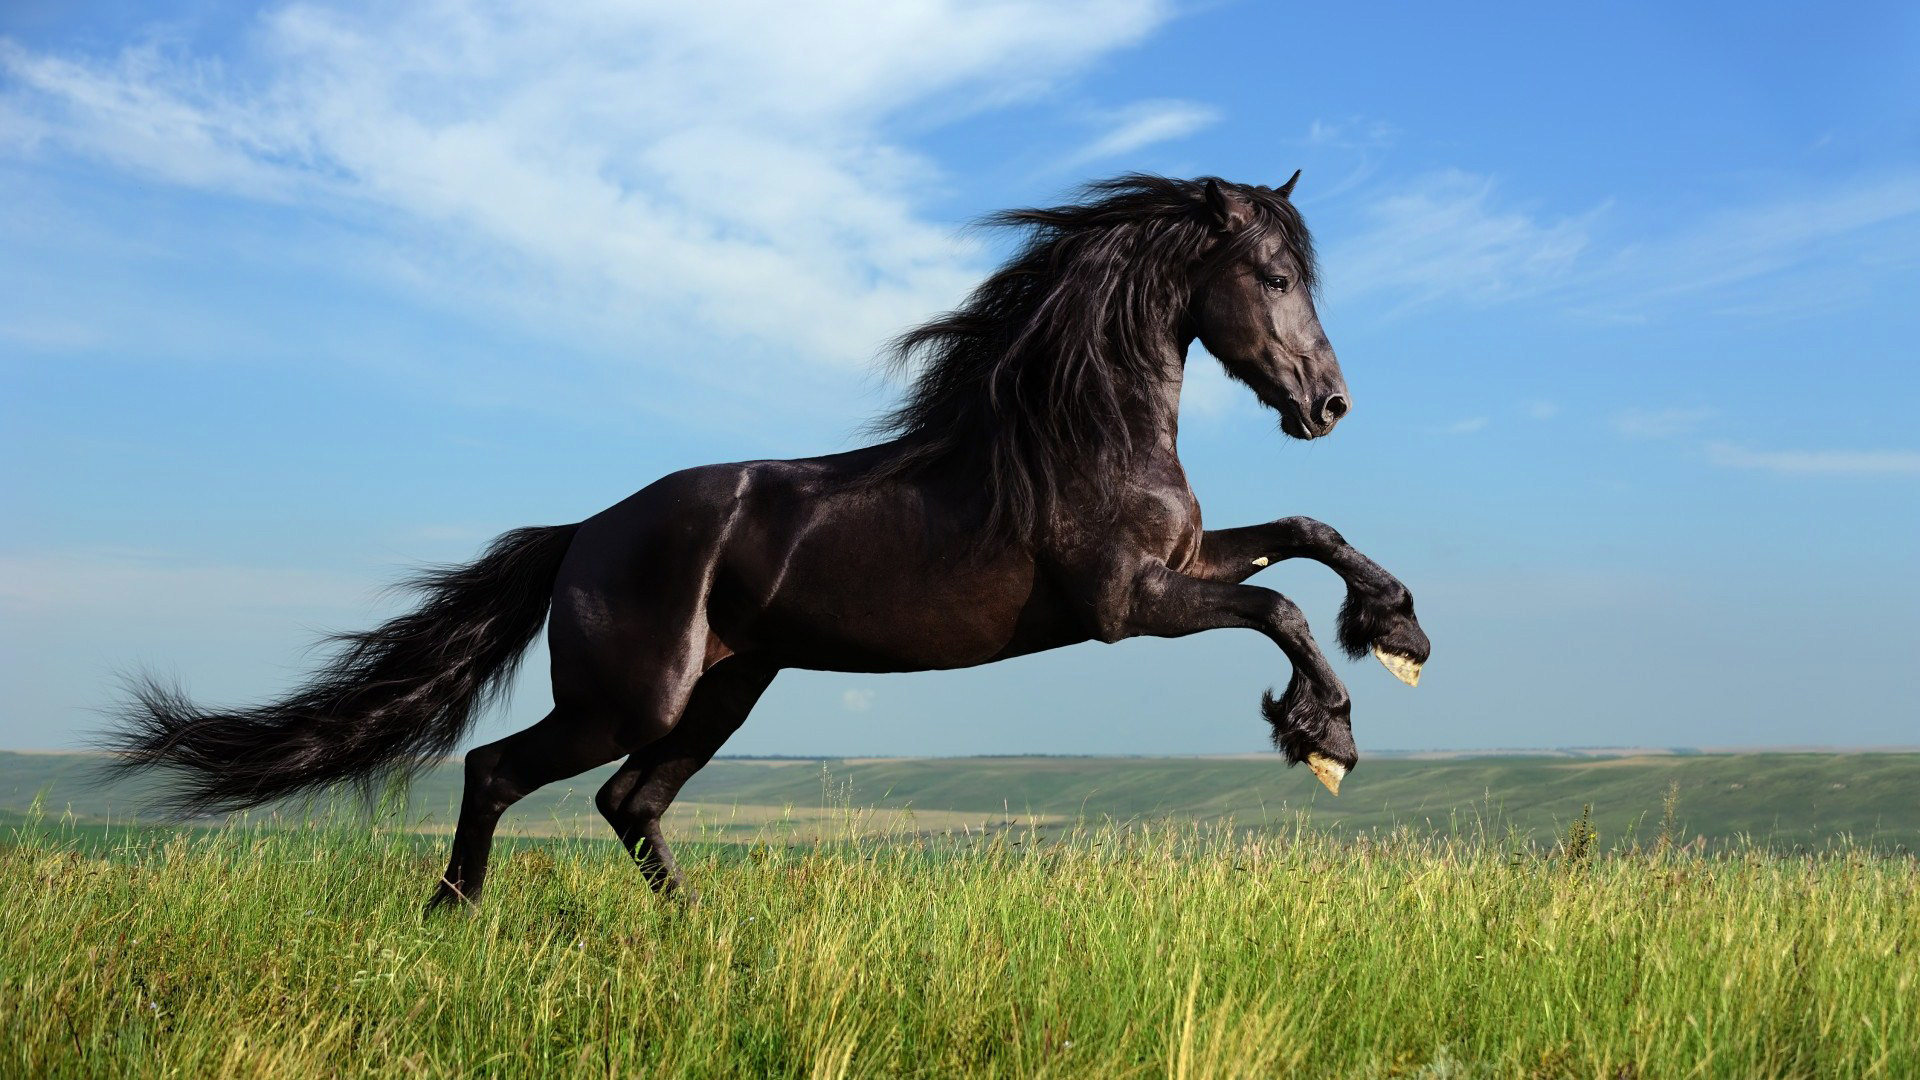 Black Horse Wallpaper Gallery Yopriceville High Quality